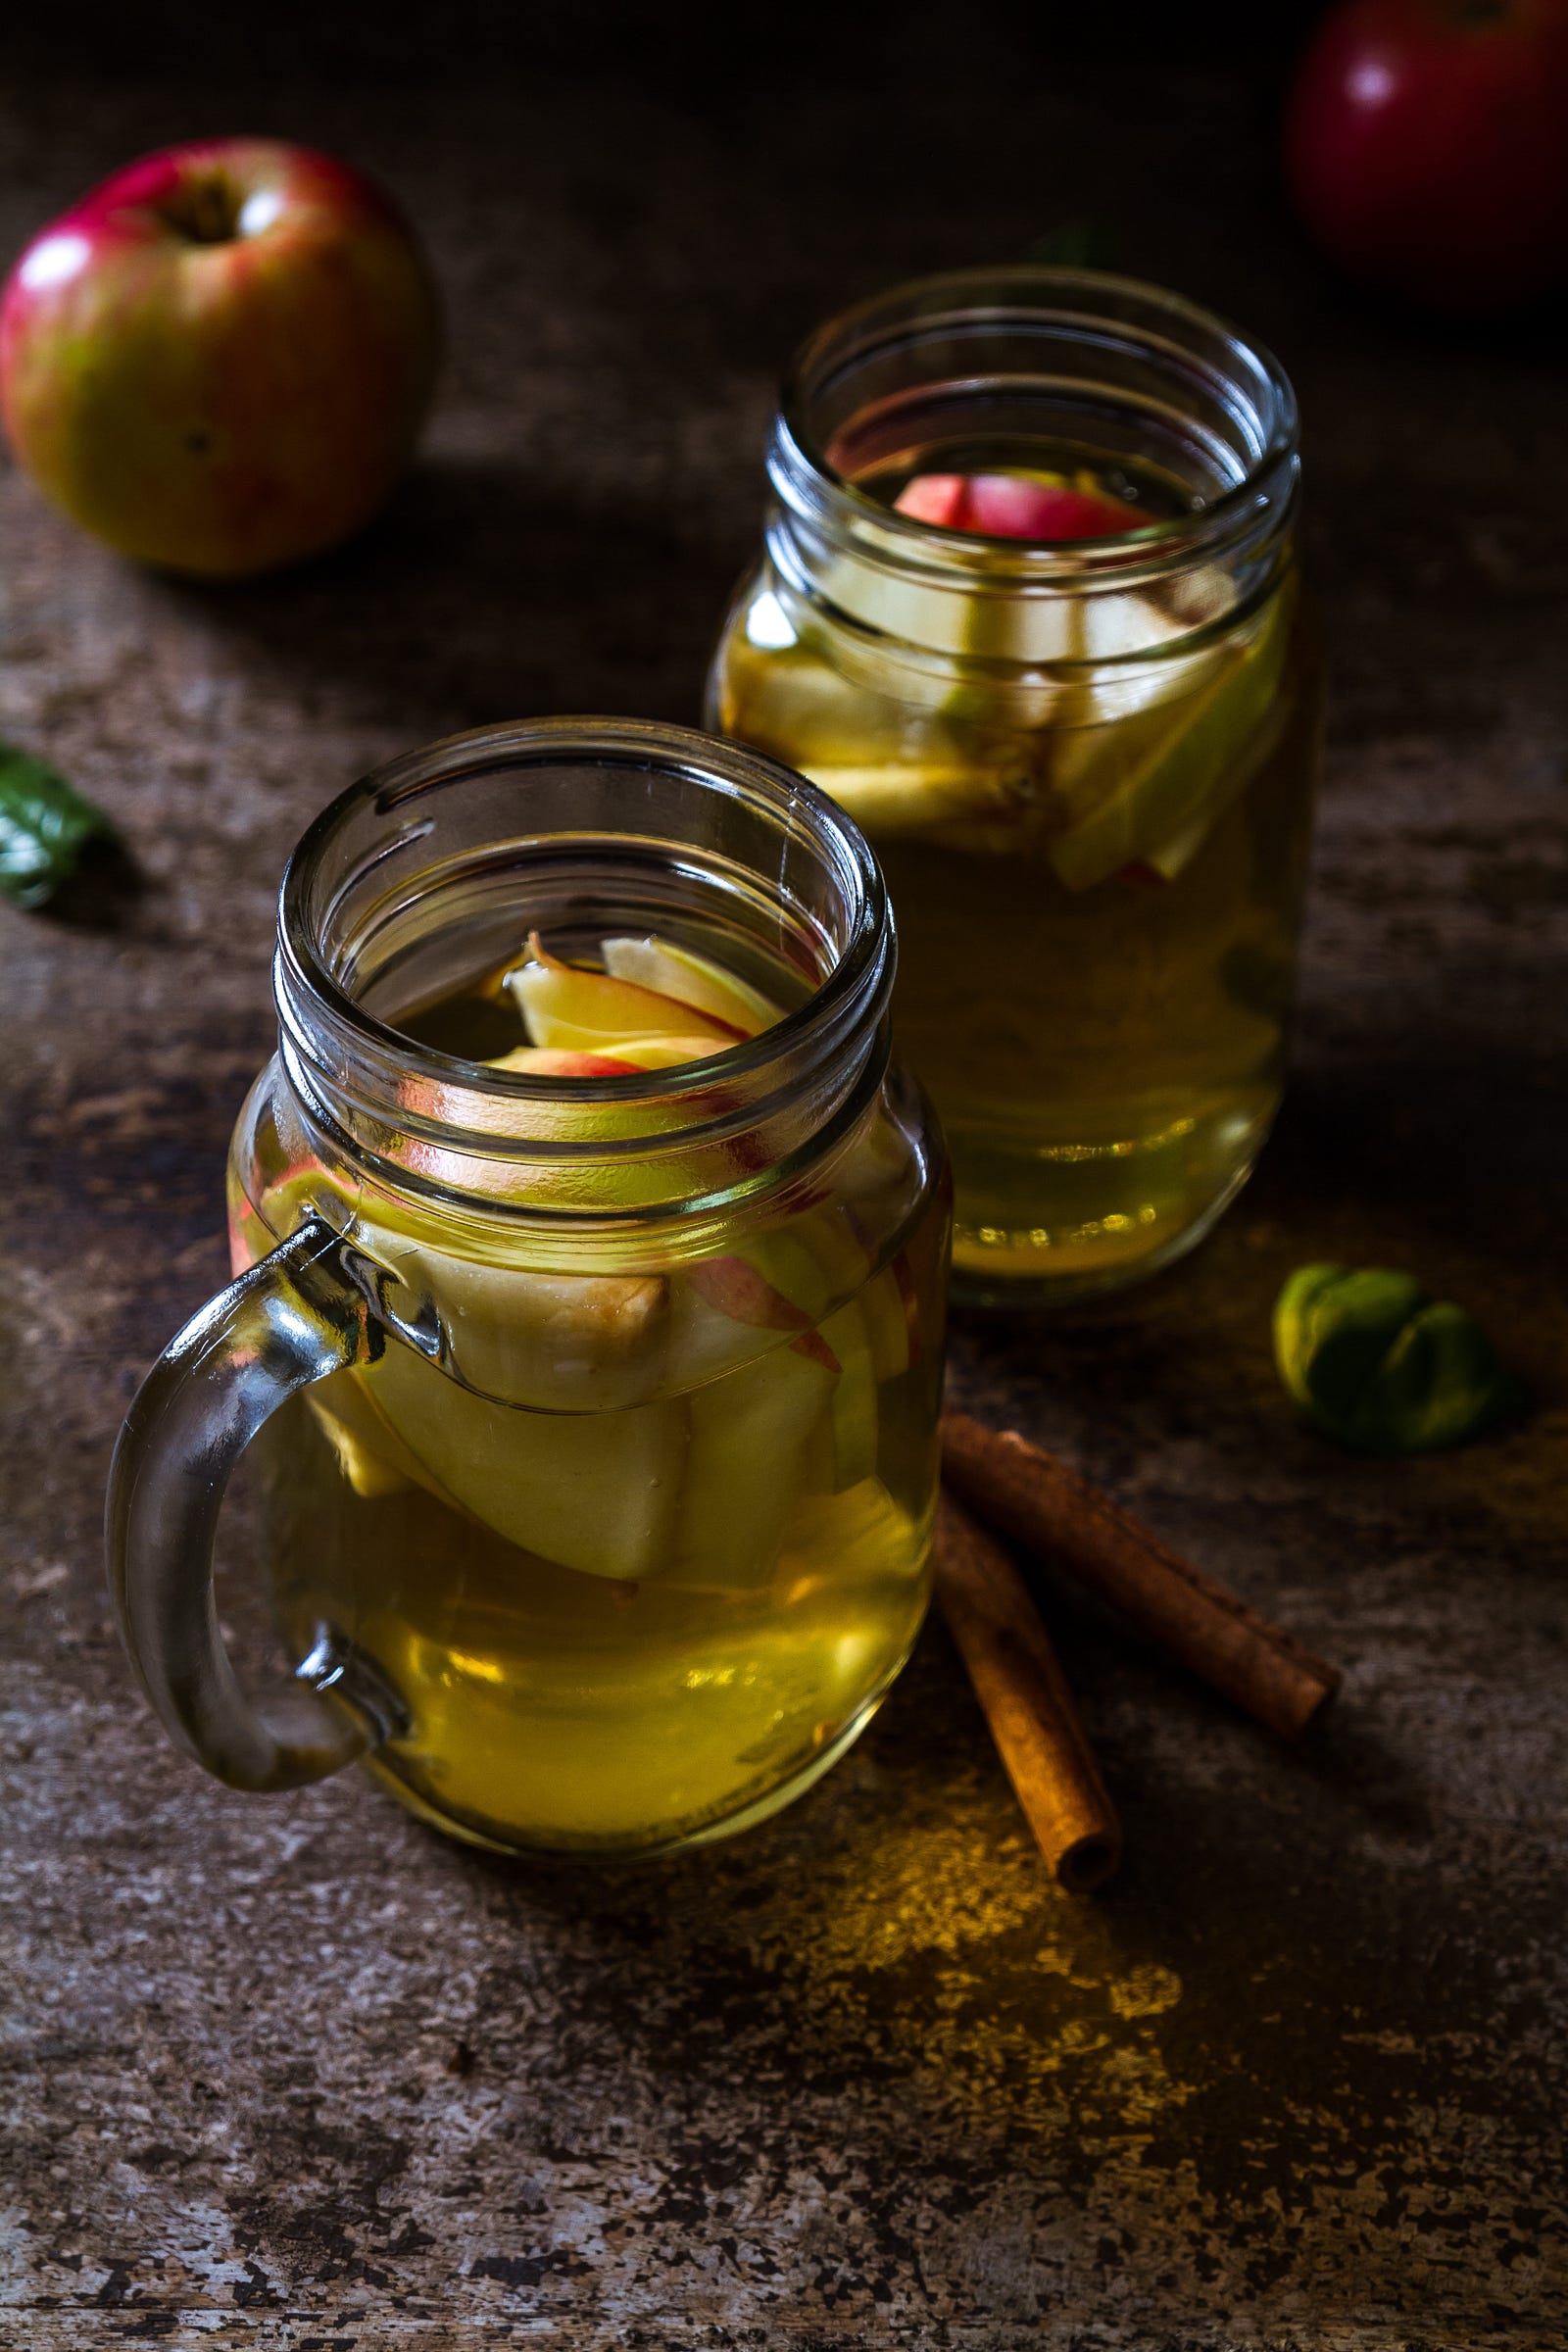 Two glass cups of vinegar, with sliced apple pieces within them. Legend has it that around 5000 BC, a Babylonian courtier “discovered” wine. The drink had formed from unattended grape juice. This finding eventually led to the discovery of vinegar and its utility for food preservation.